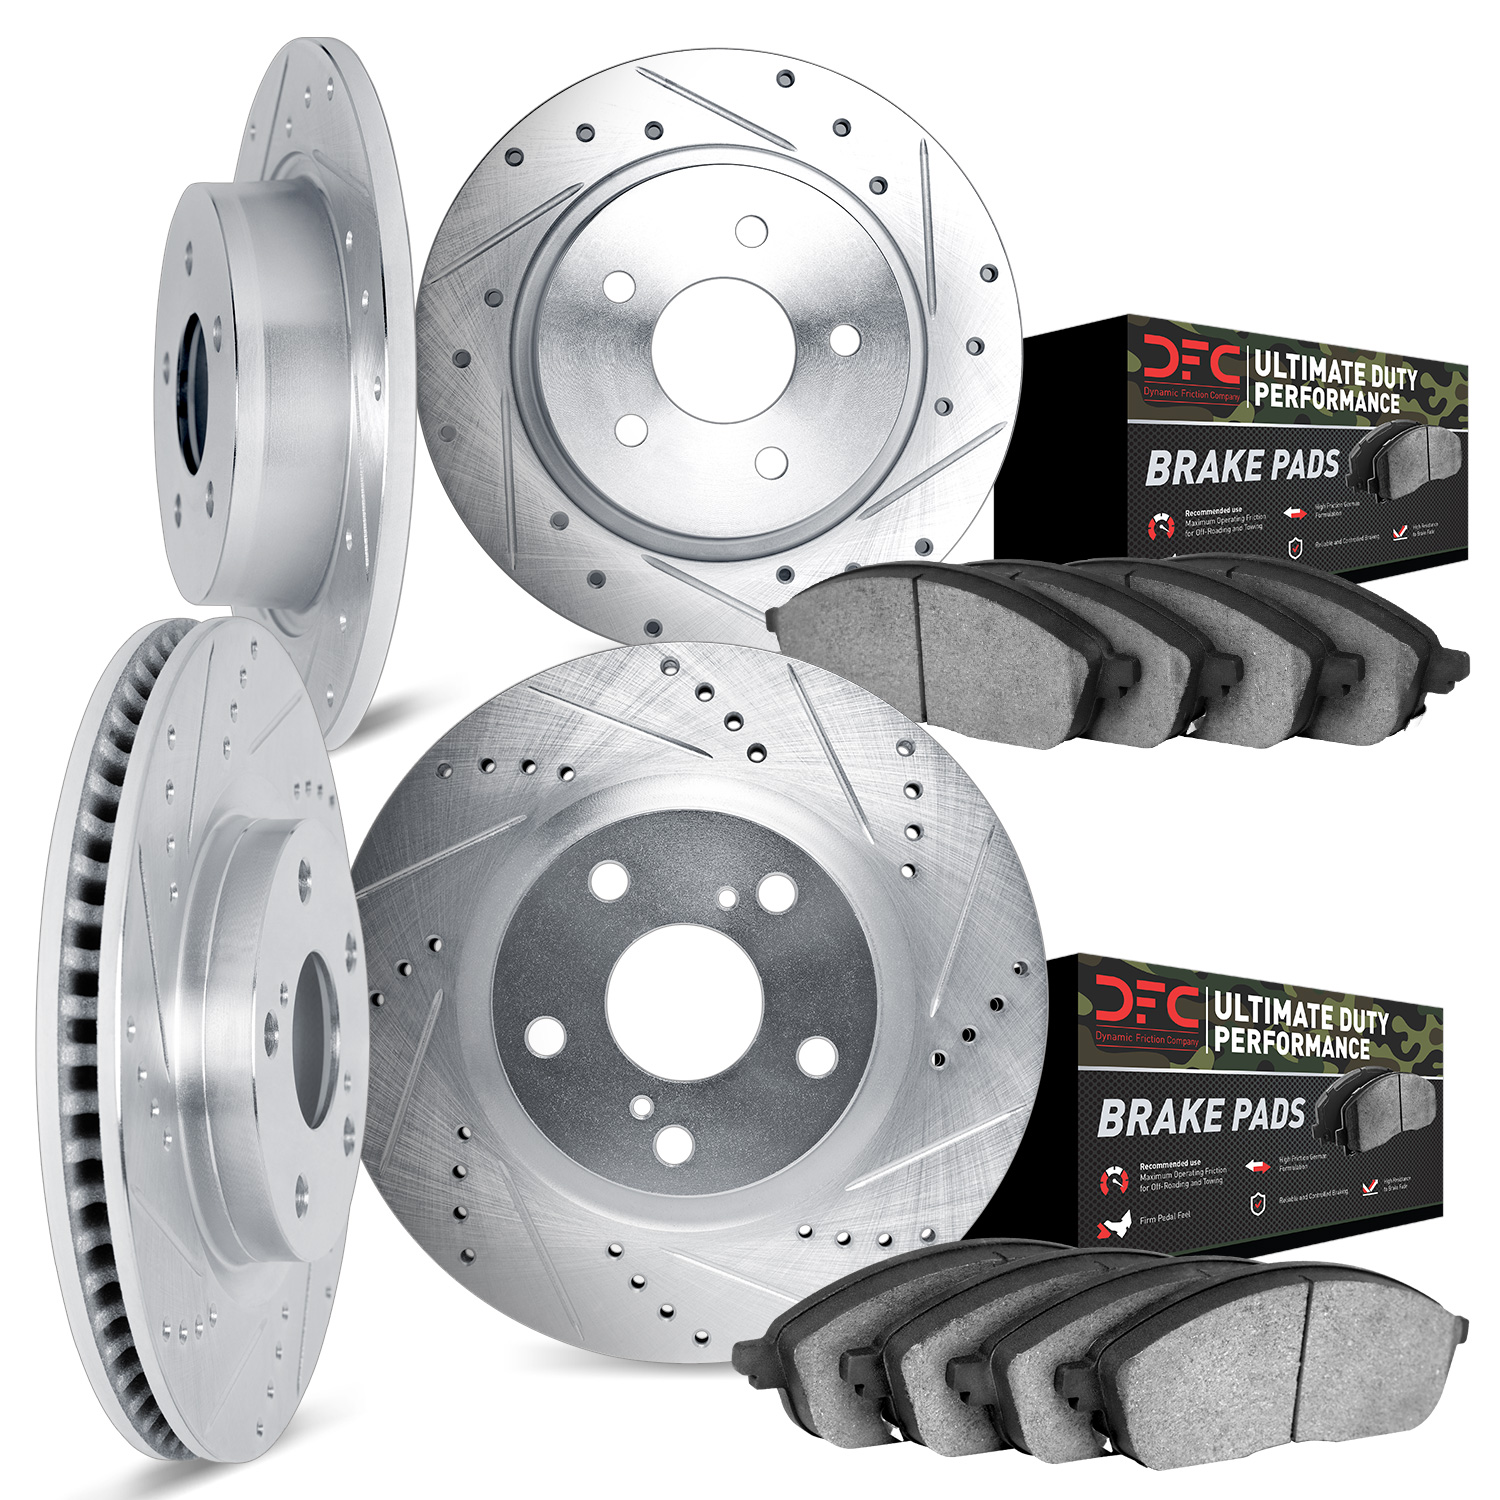 7404-42019 Drilled/Slotted Brake Rotors with Ultimate-Duty Brake Pads Kit [Silver], Fits Select Mopar, Position: Front and Rear